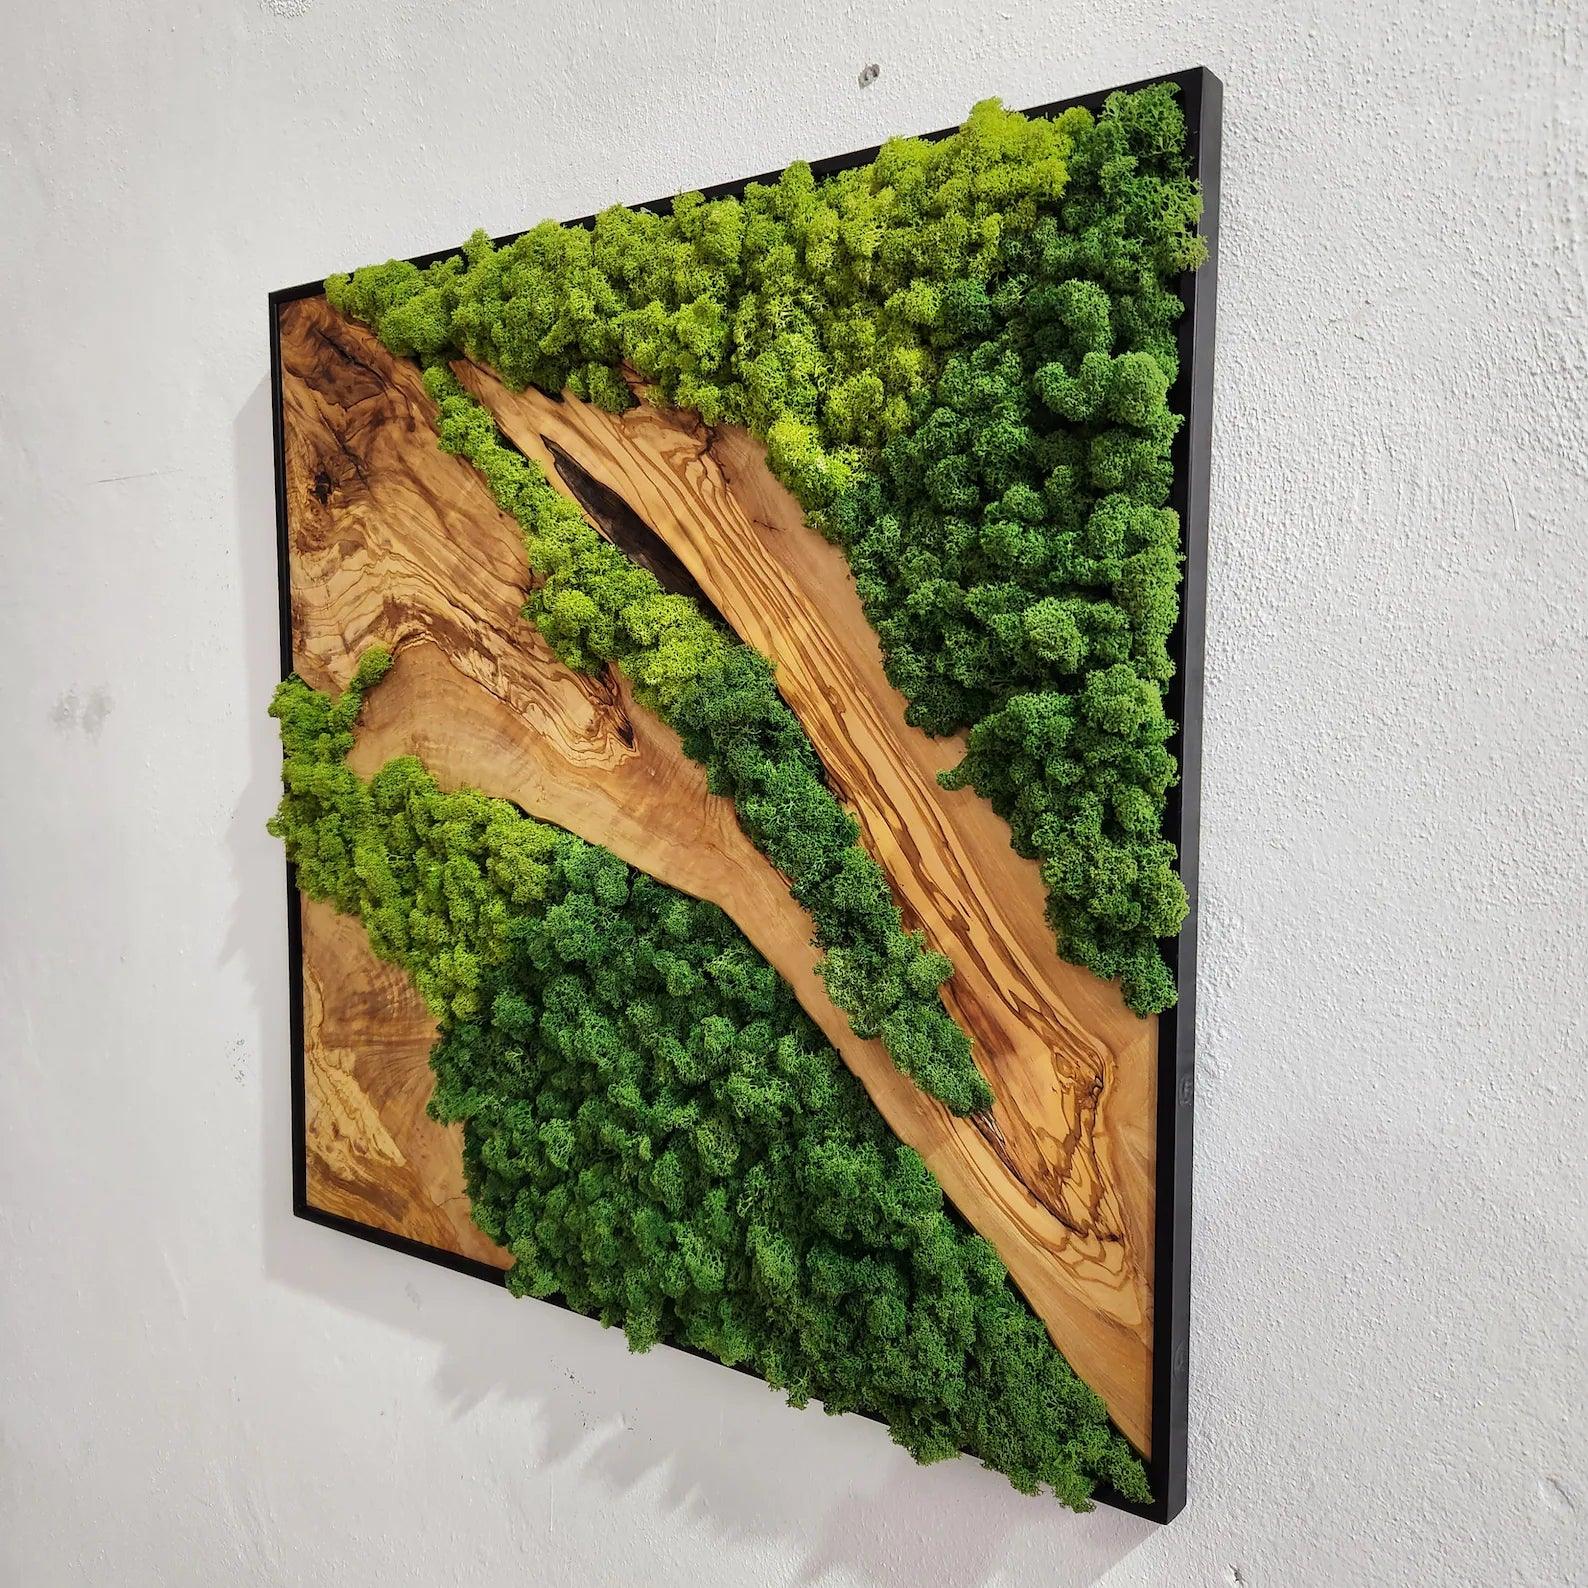 Moss and Olive Wood Wall Art 2 Colors | Premium Handmade Wall Sculptures 20x20